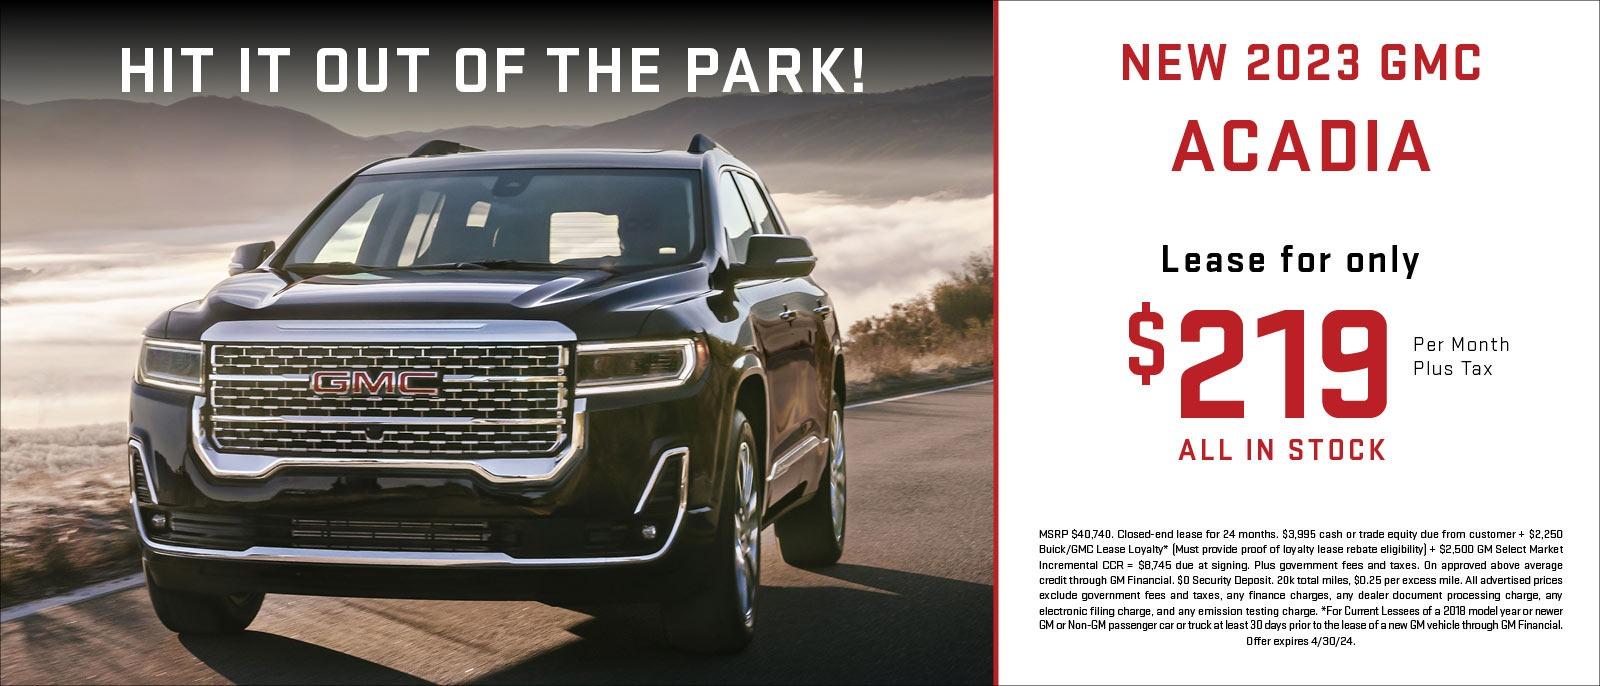 NEW 2023 GMC ACADIA Lease for only $219  Per Month Plus Tax ALL IN STOCK